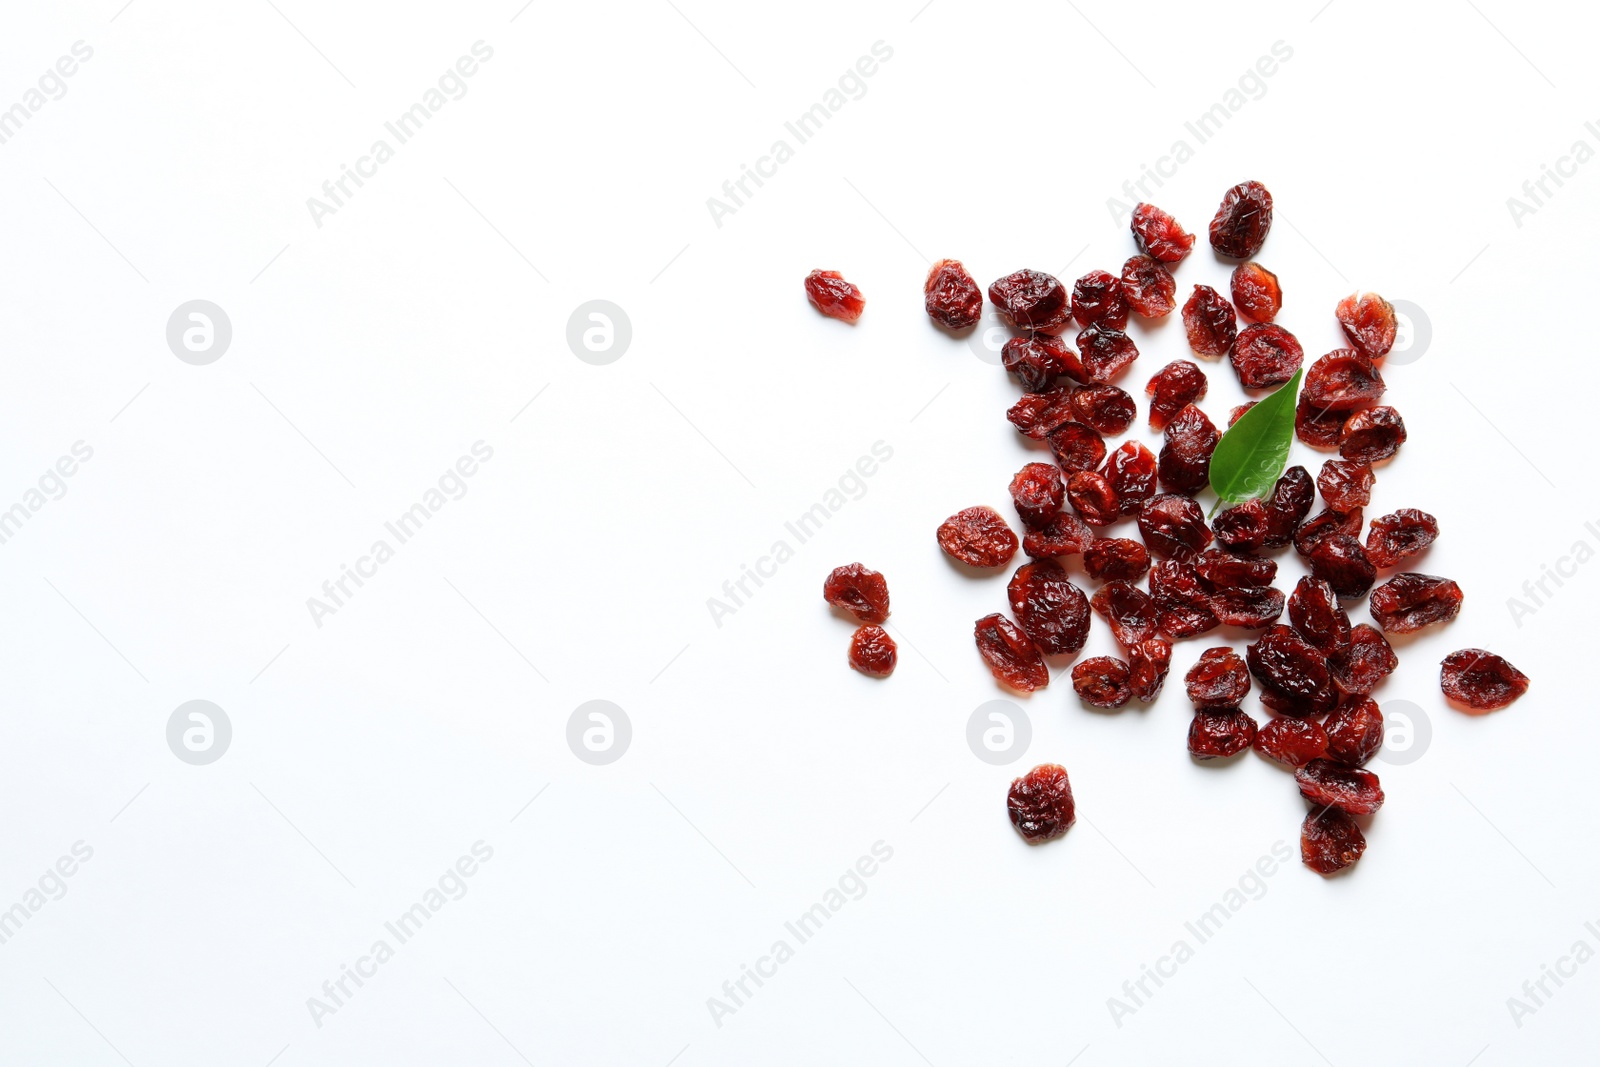 Photo of Cranberries on white background, top view with space for text. Dried fruit as healthy snack